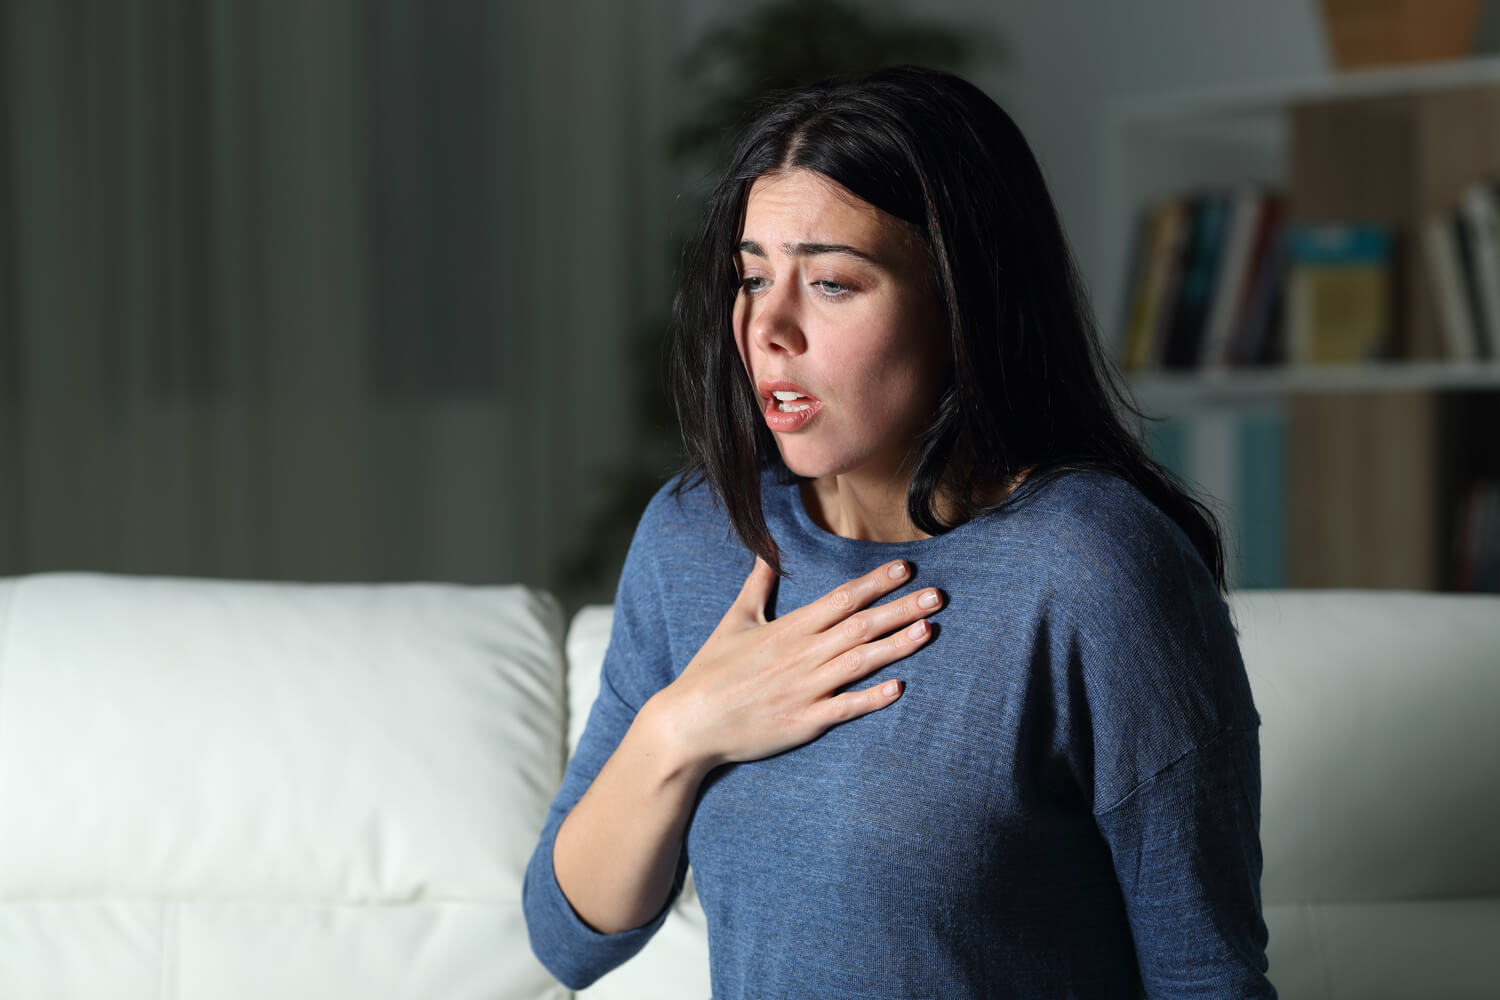 Experiencing Breathlessness at Night